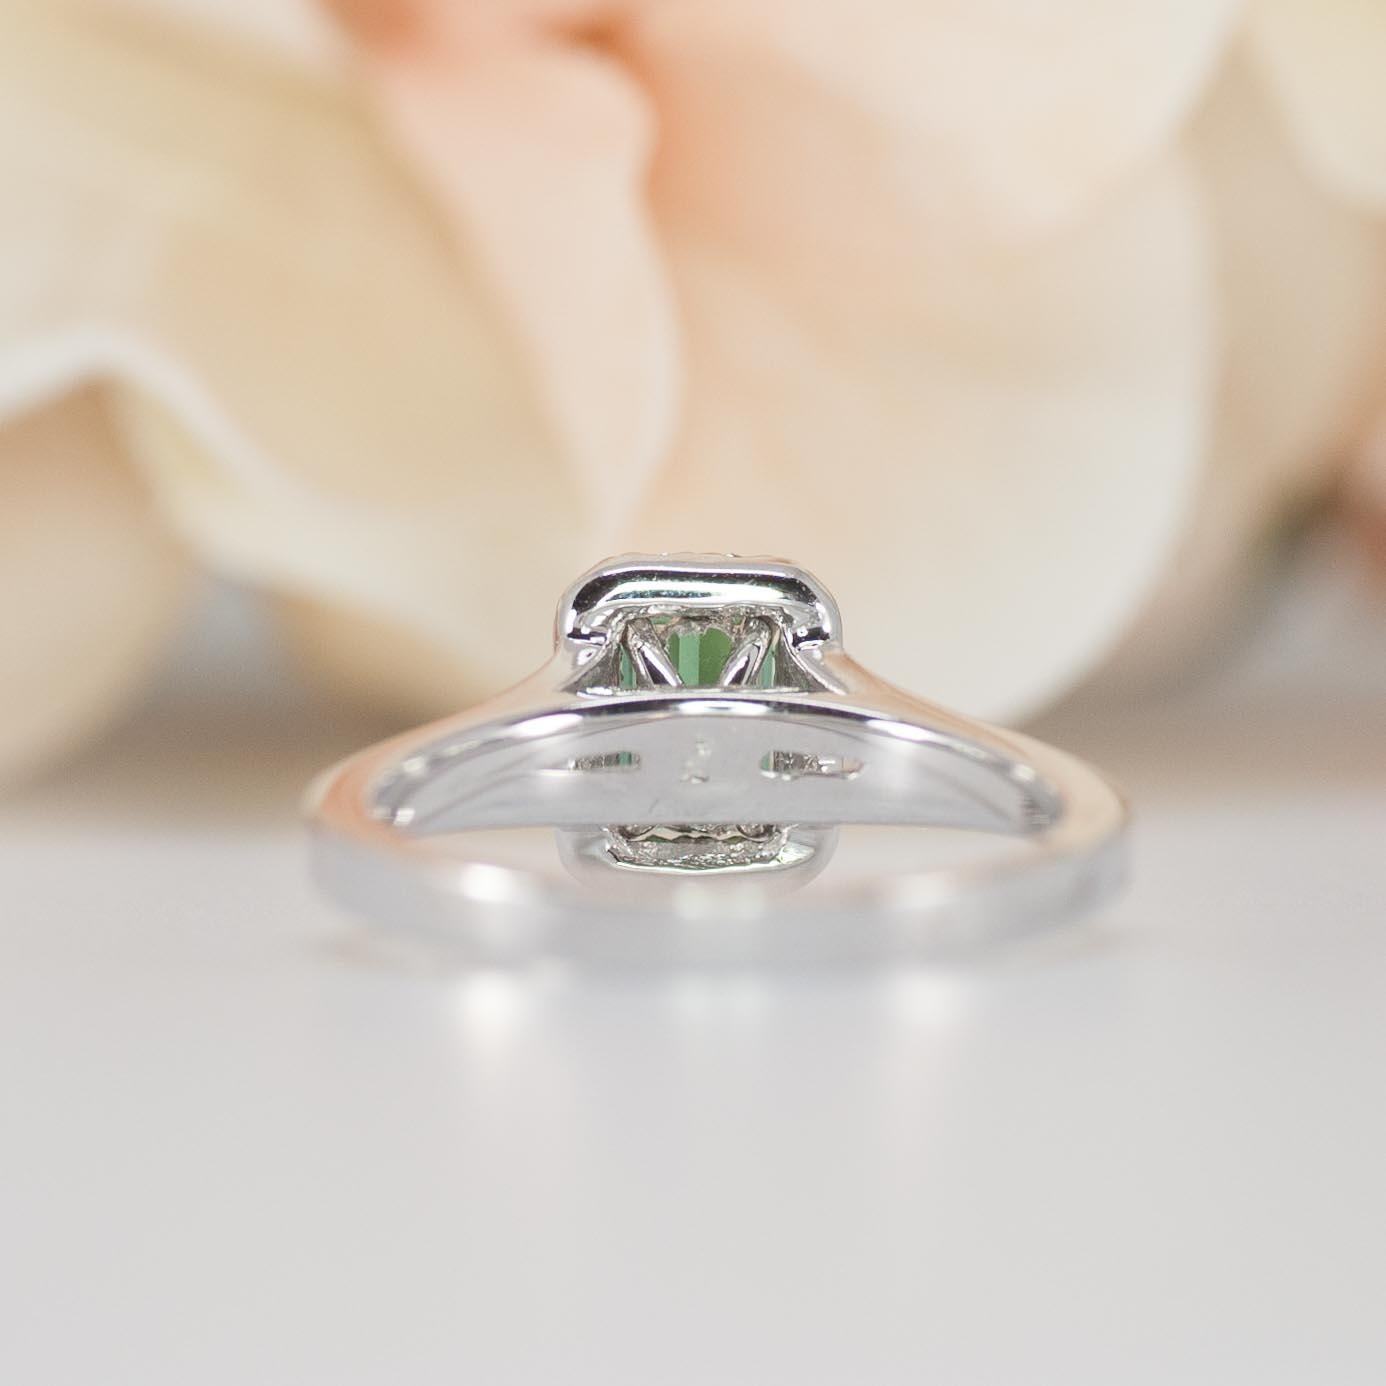 Natural Green Tourmaline Ring, White Gold, Emerald Cut  In New Condition For Sale In Mission Viejo, CA